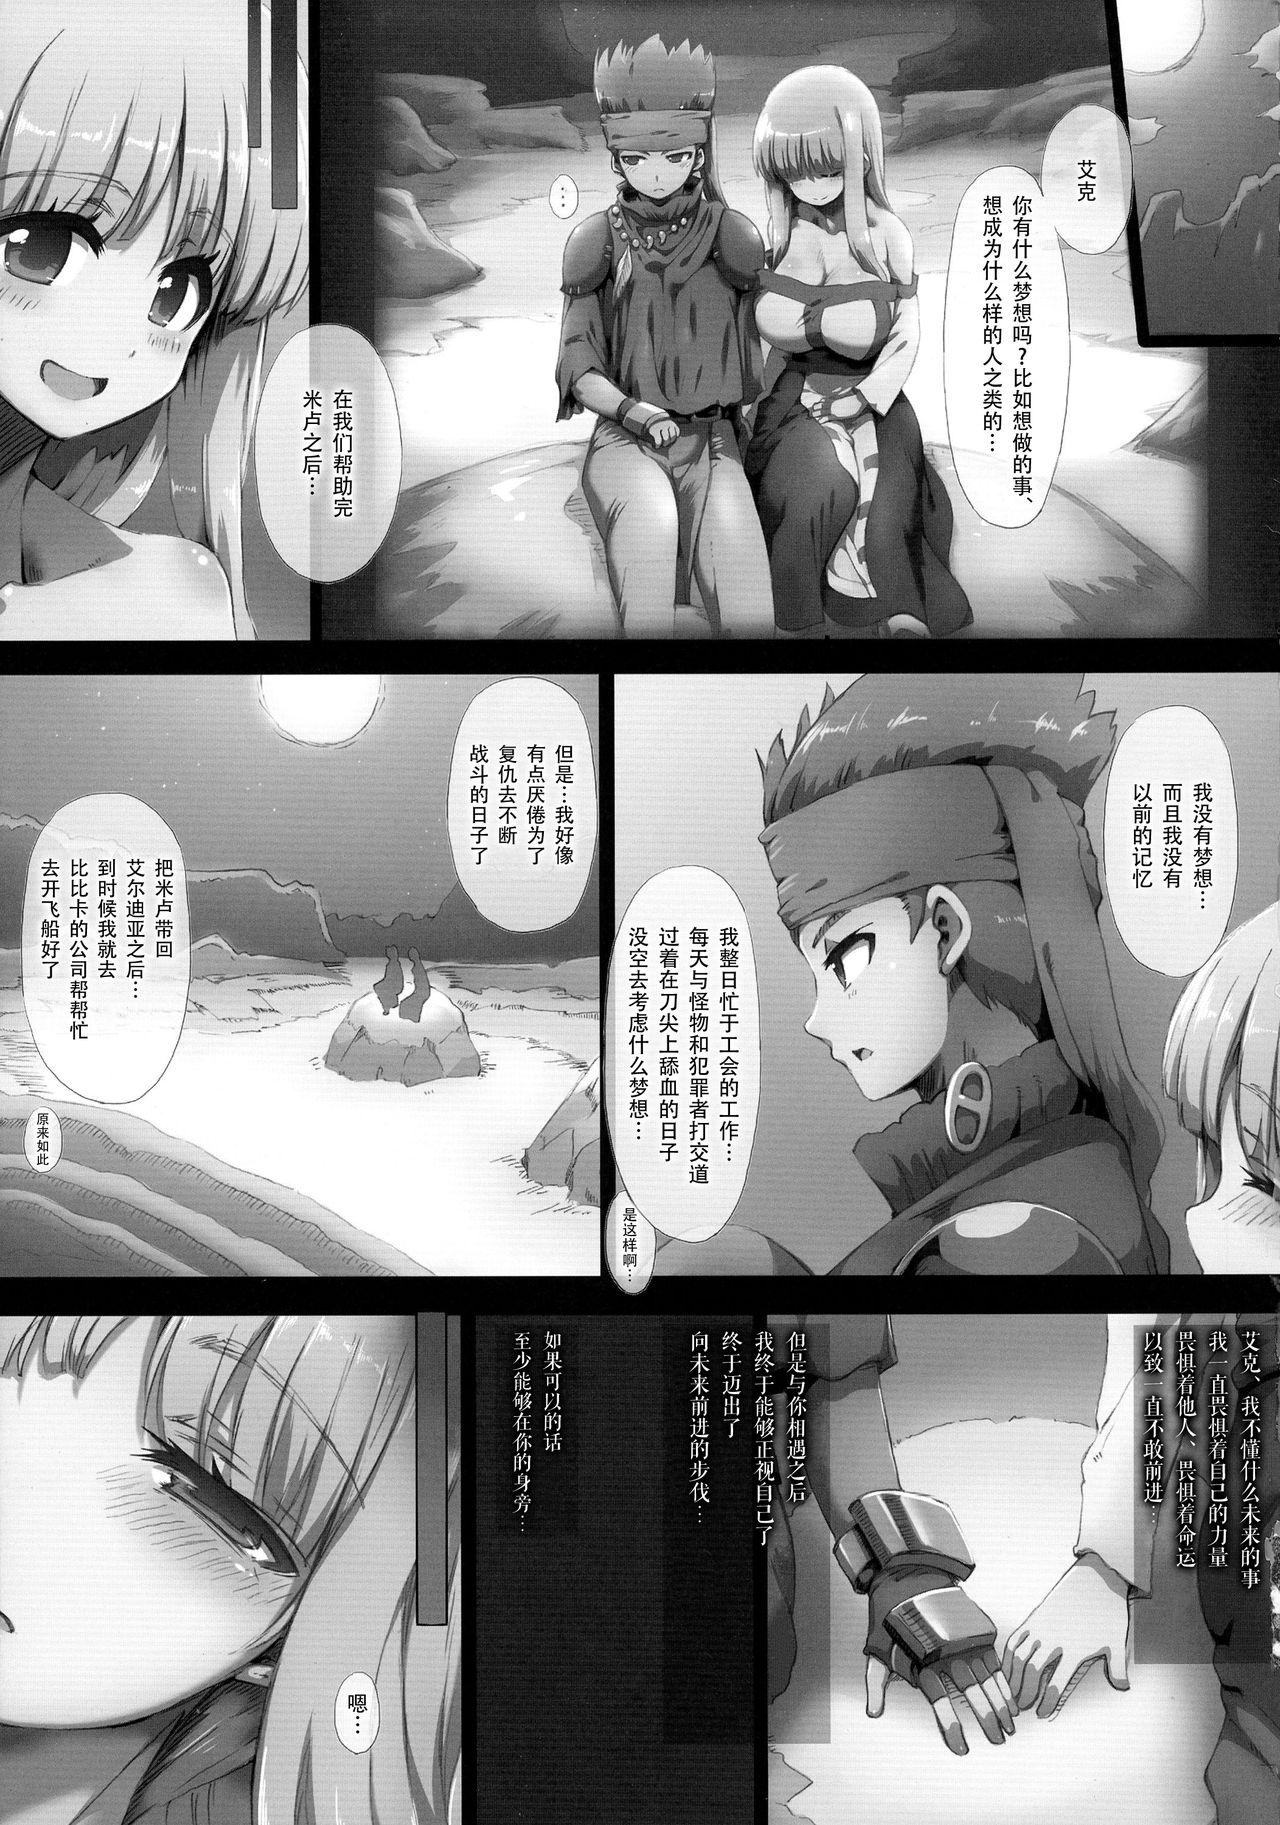 Fuck [GREAT Acta (tokyo)] Lieza Origin (Arc The Lad)[Chinese]【不可视汉化】 - Arc the lad Chunky - Page 6